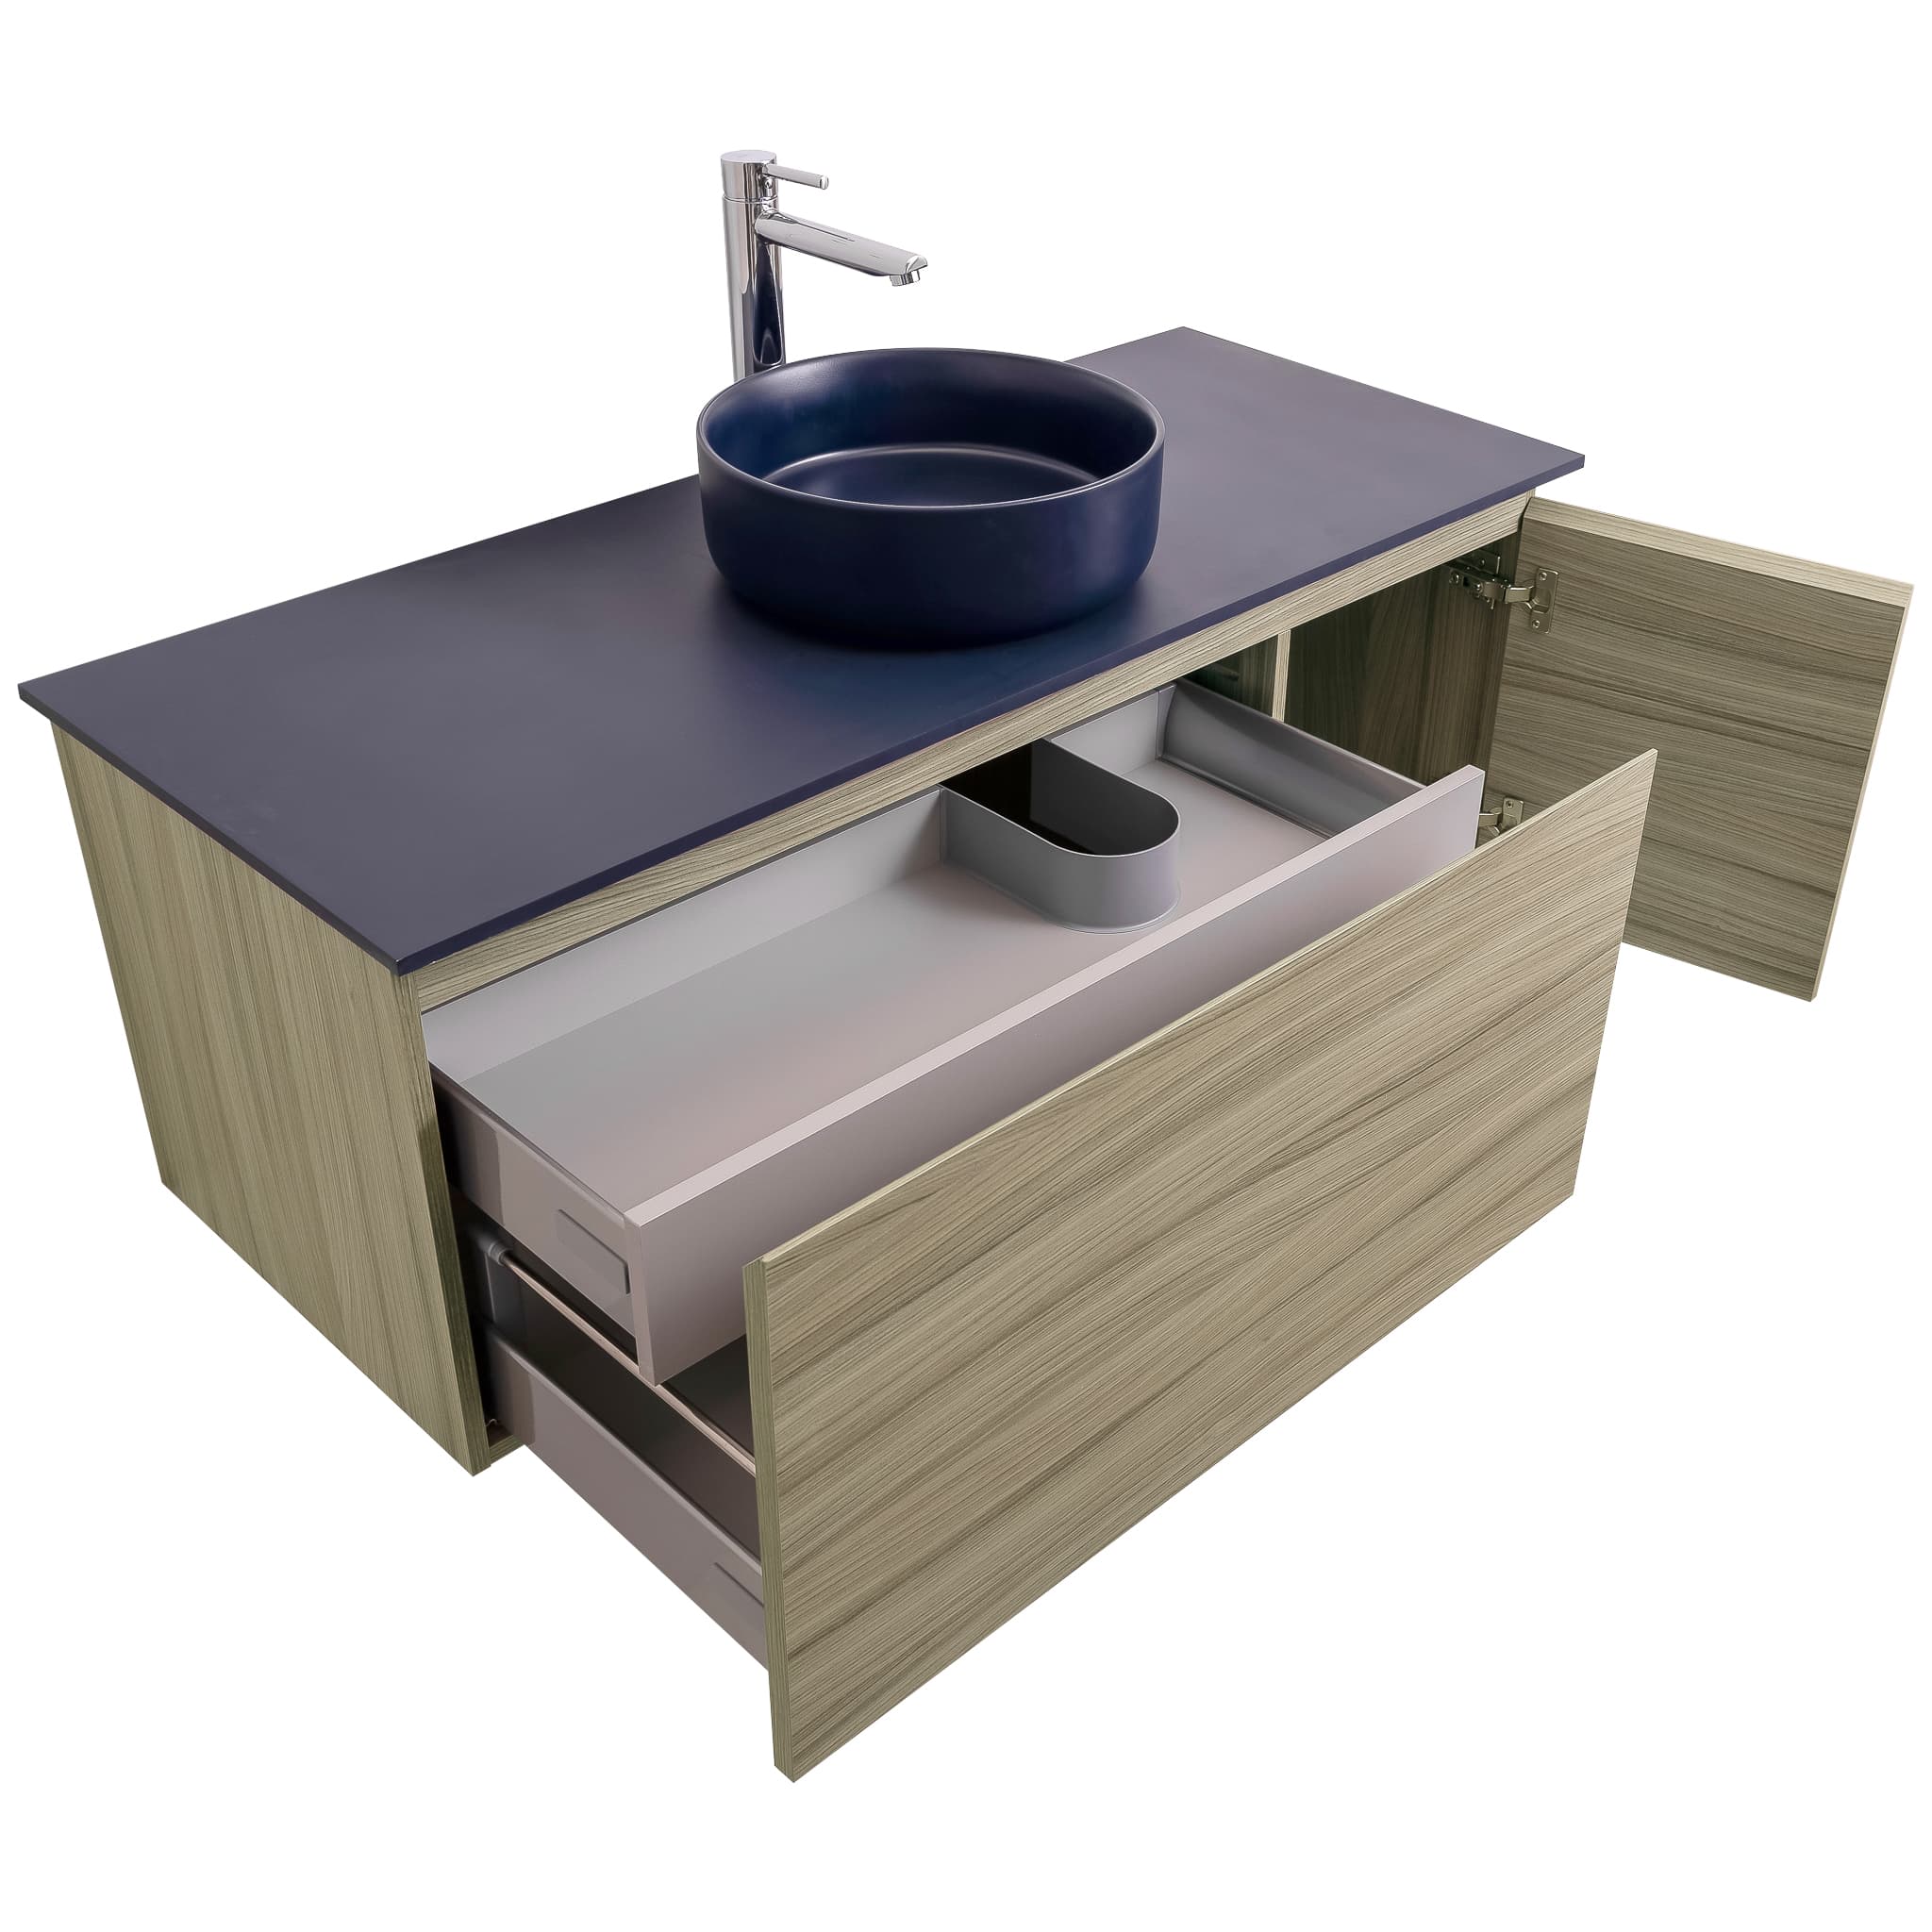 Venice 47.5 Nilo Grey Wood Texture Cabinet, Ares Navy Blue Top And Ares Navy Blue Ceramic Basin, Wall Mounted Modern Vanity Set